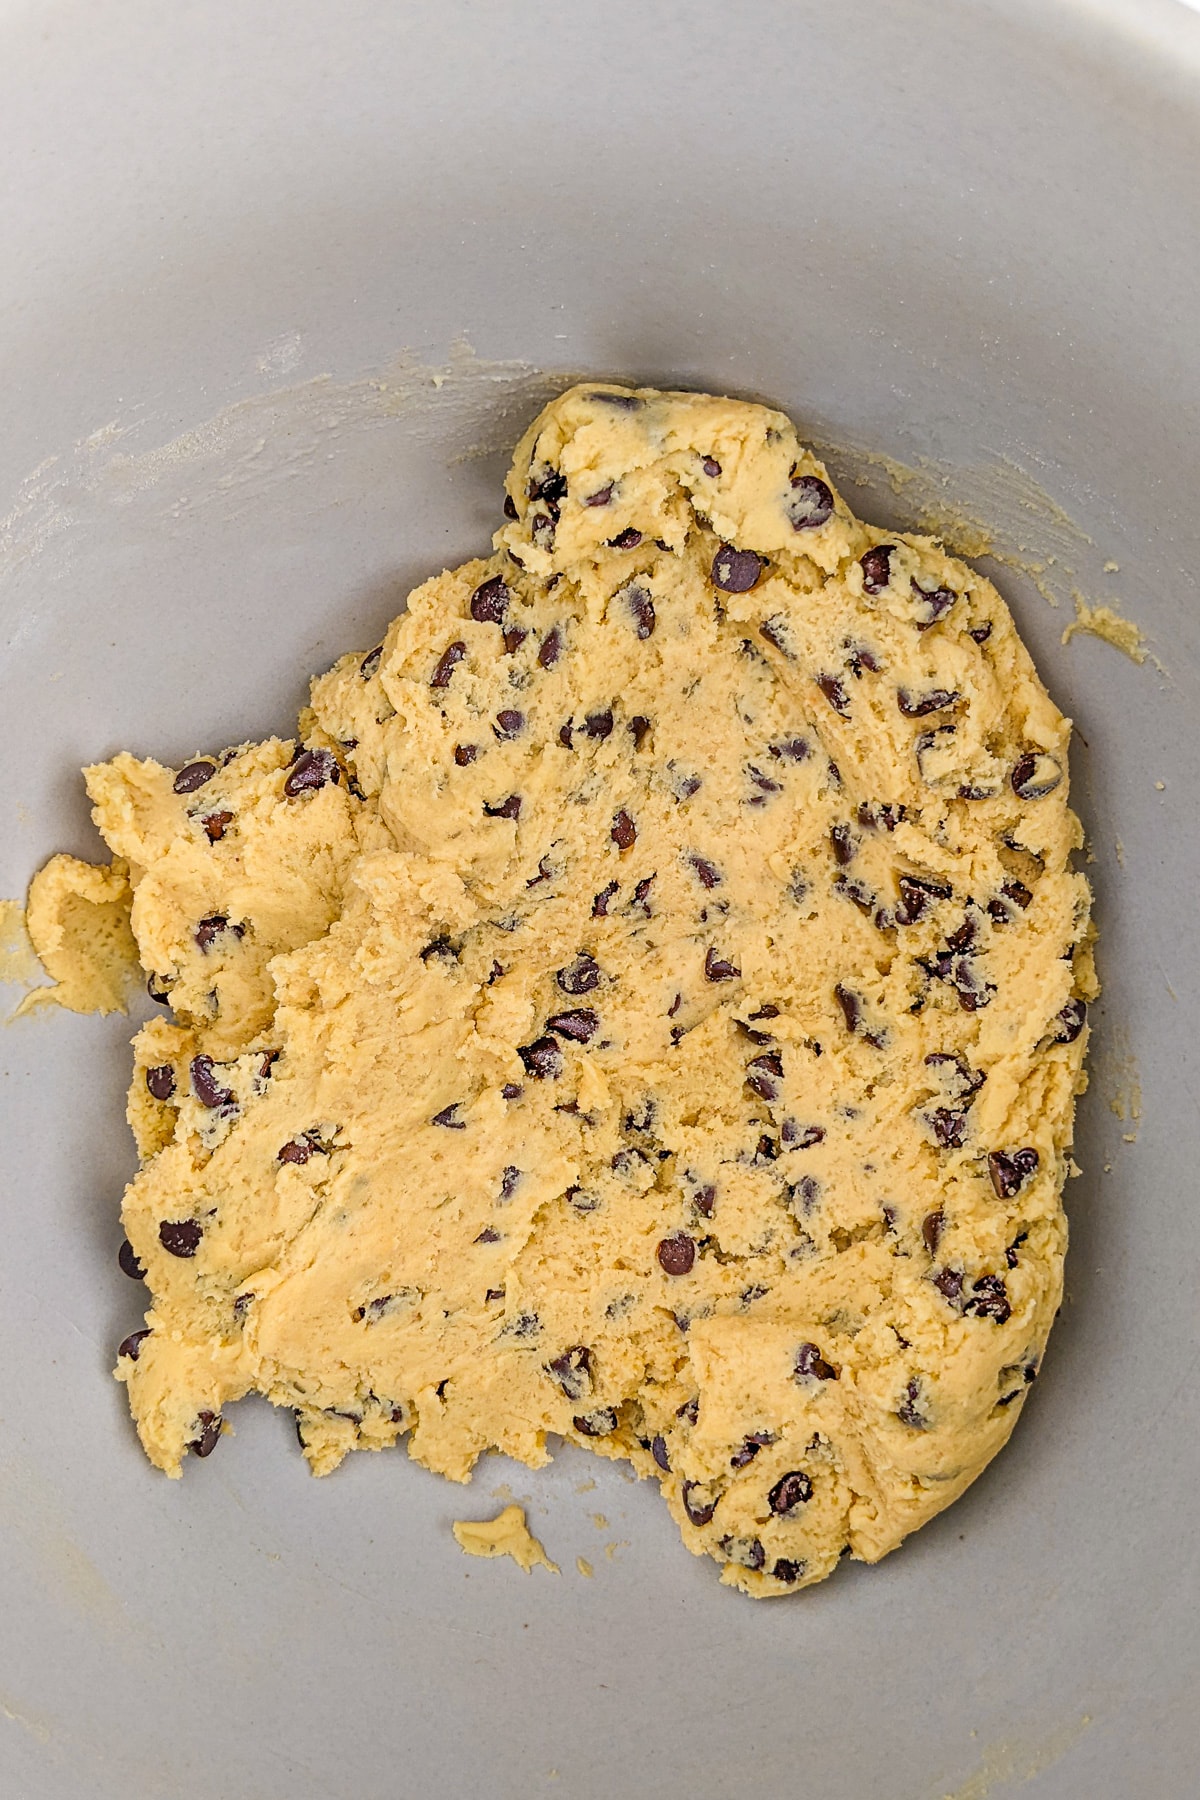 Mixed dough for chocolate chip cookies.